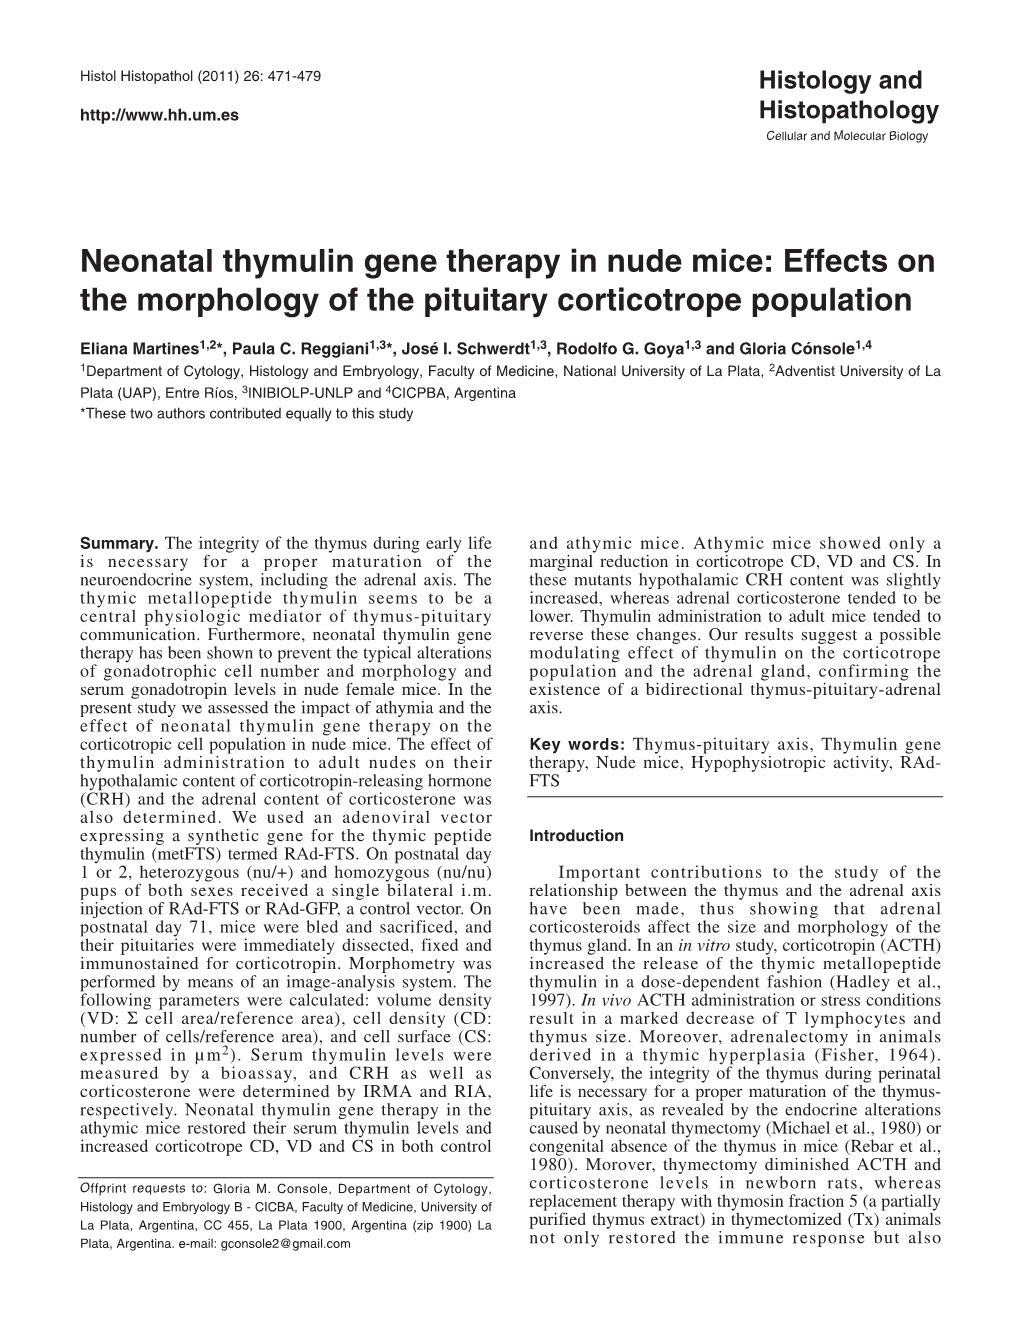 Neonatal Thymulin Gene Therapy in Nude Mice: Effects on the Morphology of the Pituitary Corticotrope Population